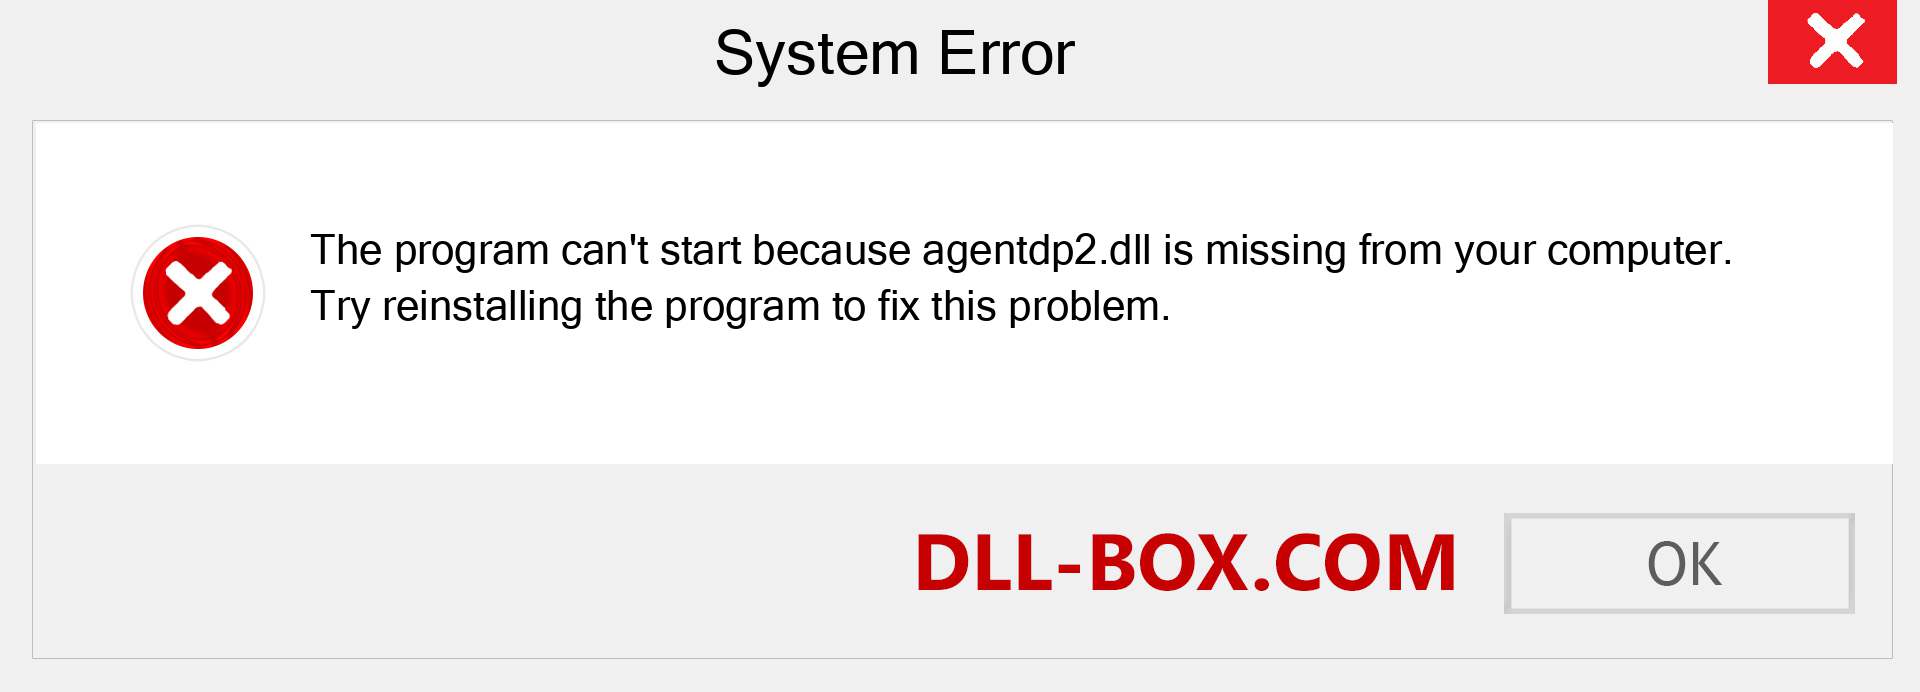  agentdp2.dll file is missing?. Download for Windows 7, 8, 10 - Fix  agentdp2 dll Missing Error on Windows, photos, images